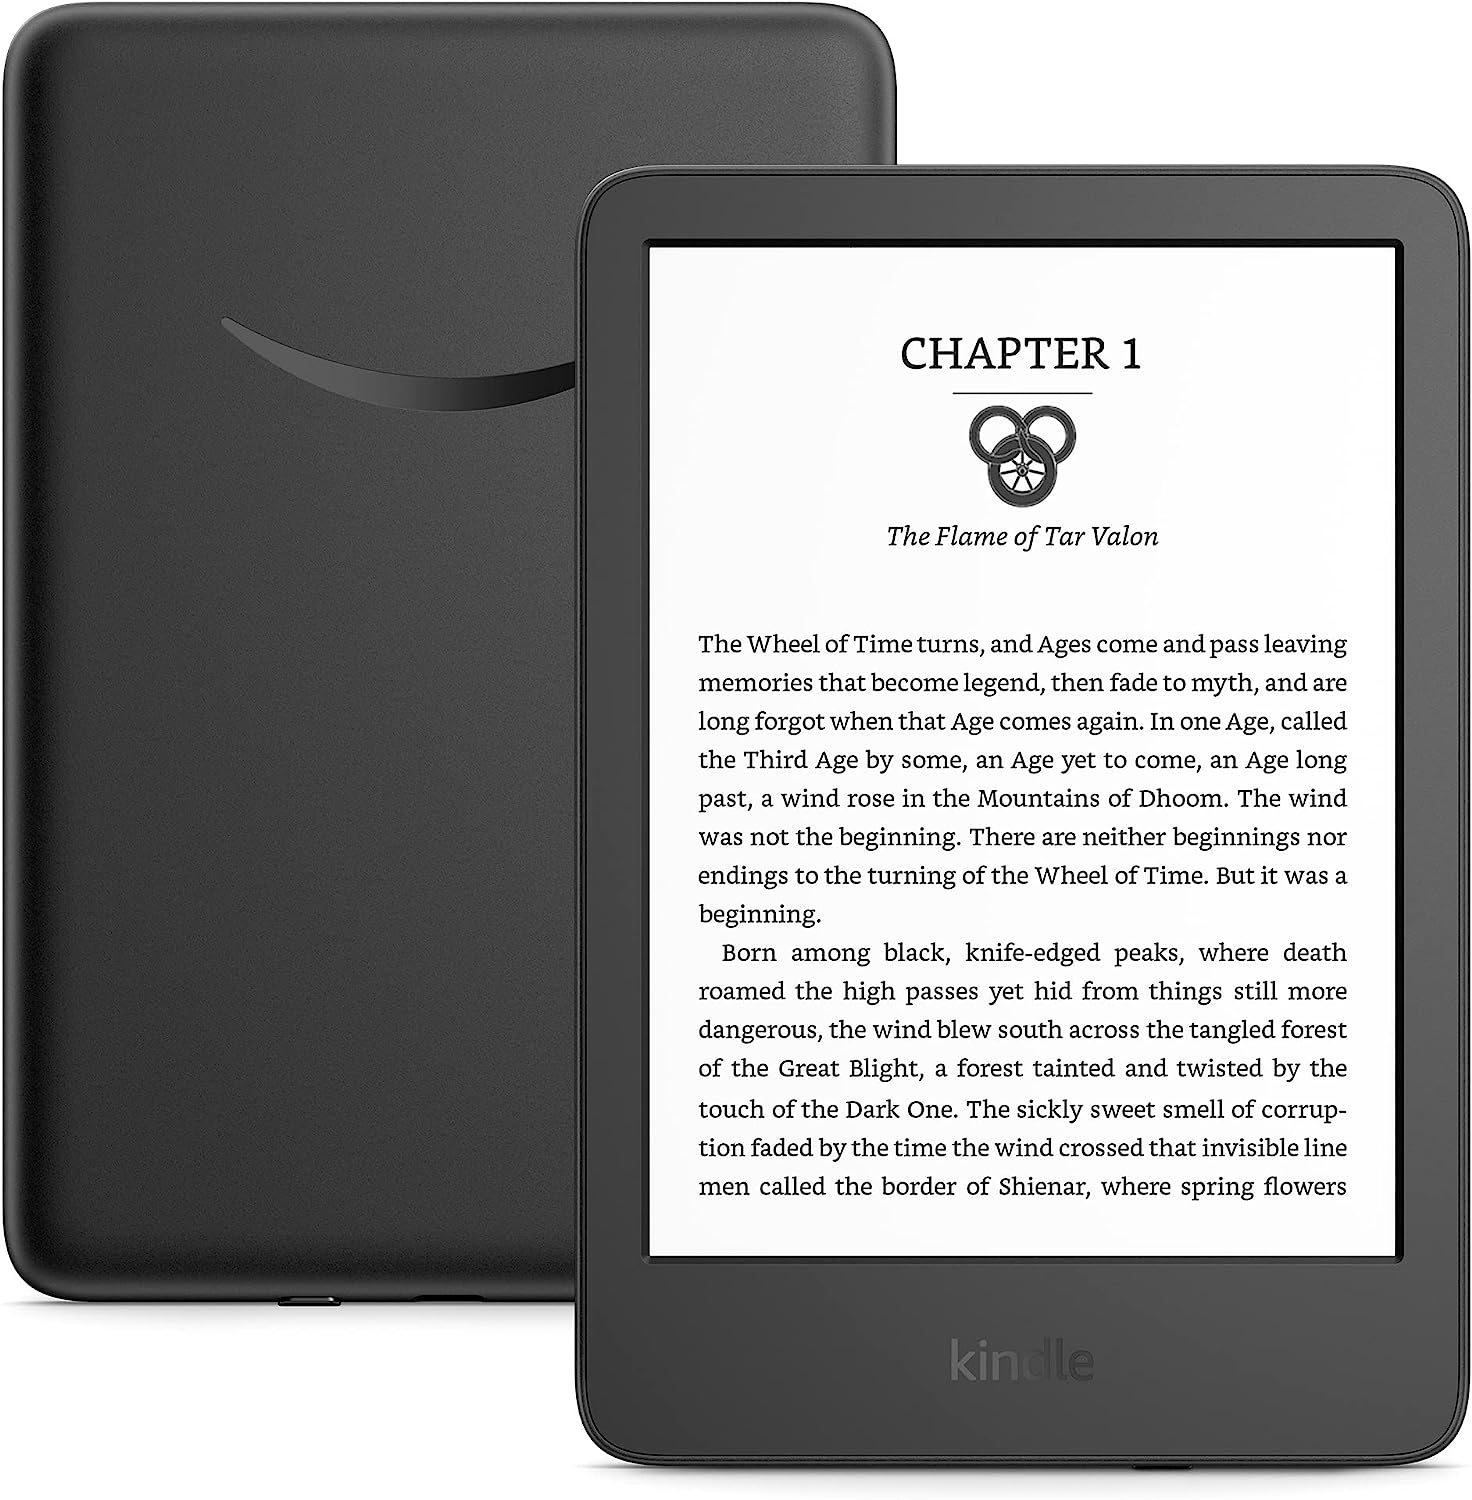 Save up to 29% on Amazon Kindle e-readers - NotebookCheck.net News